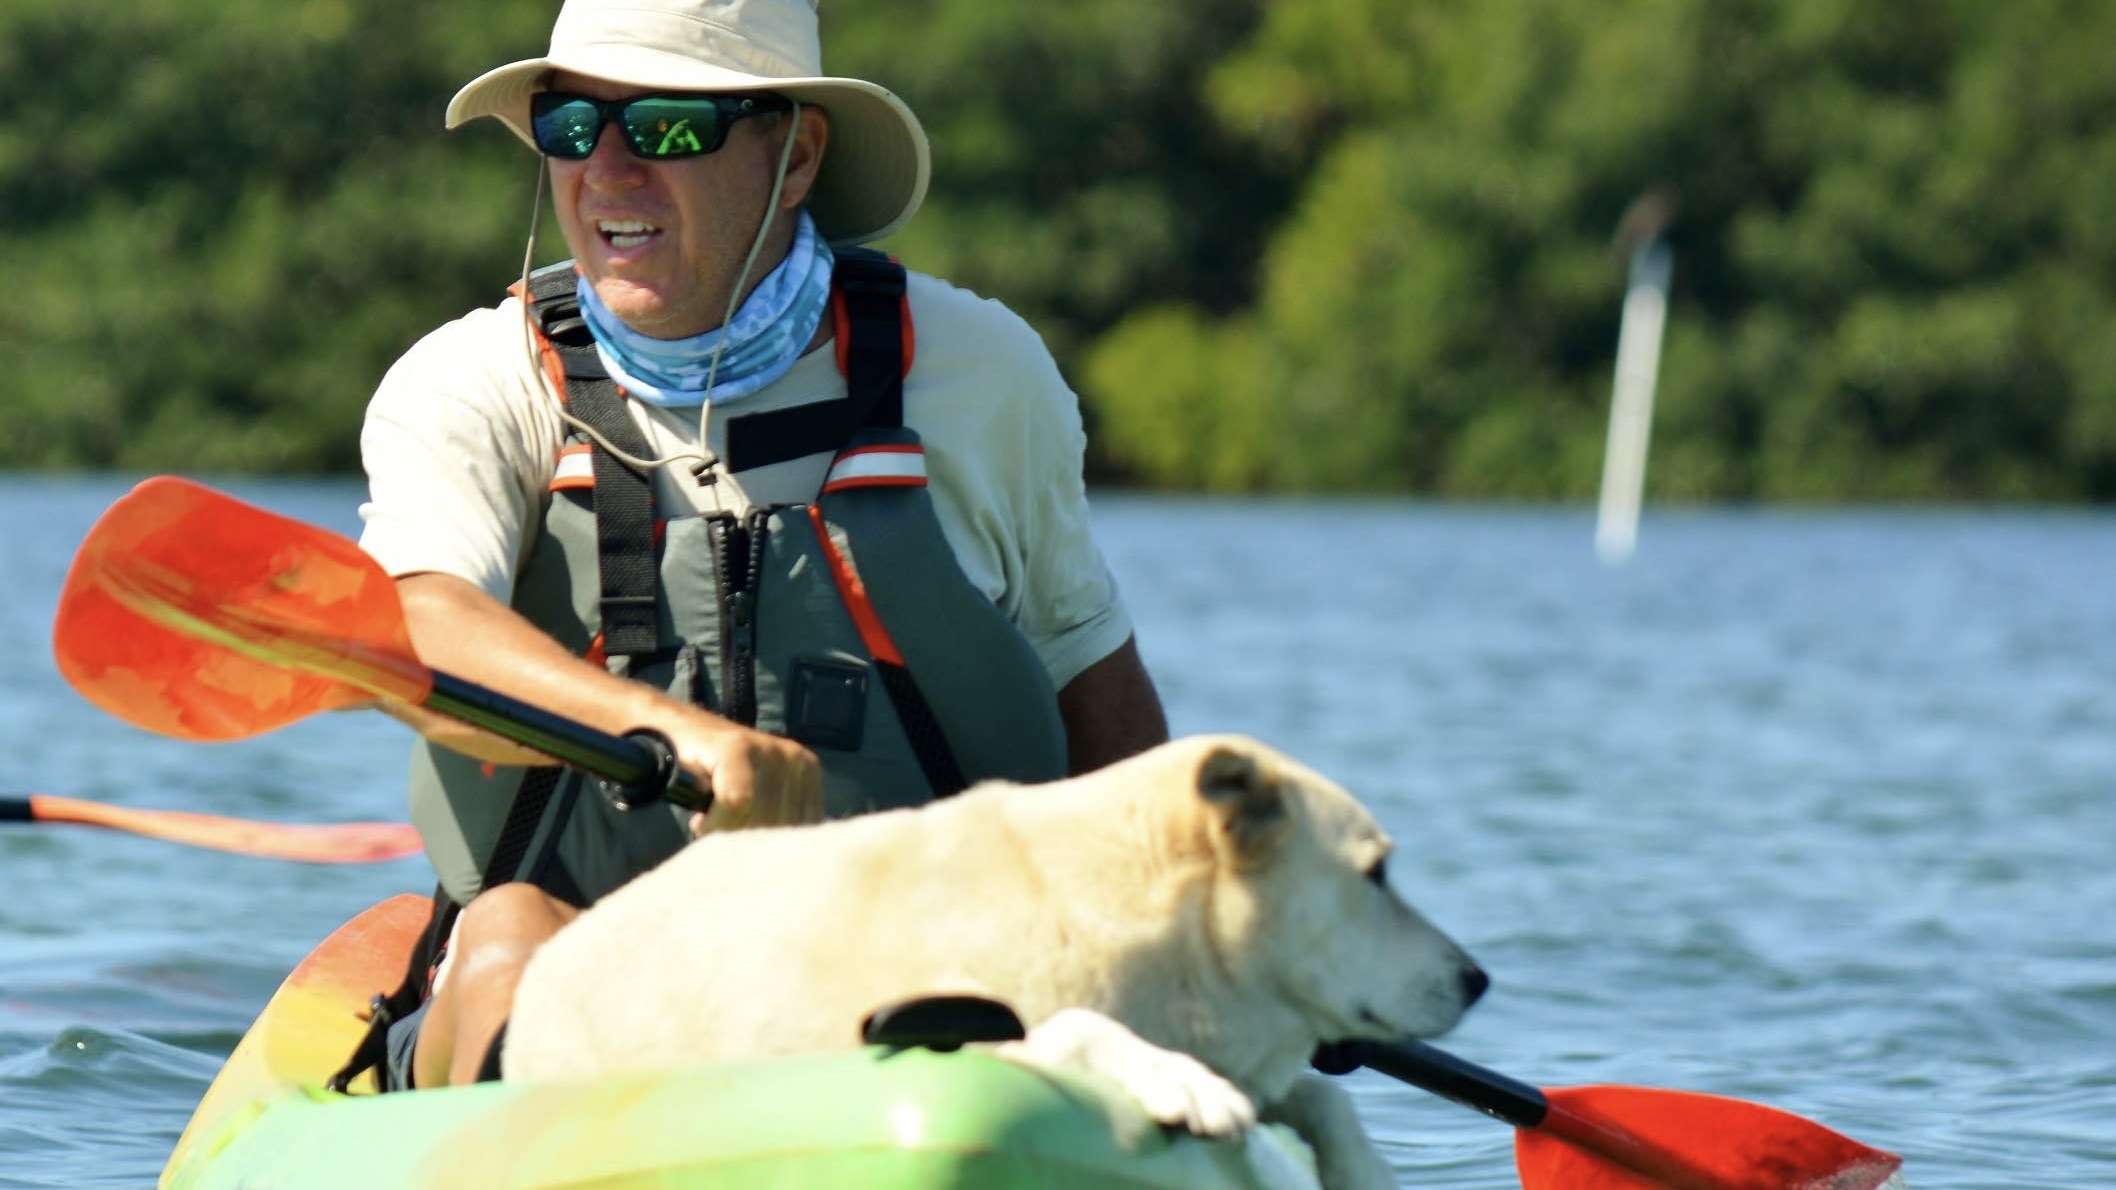 4. Eco-Kayak with Bill and Scupper